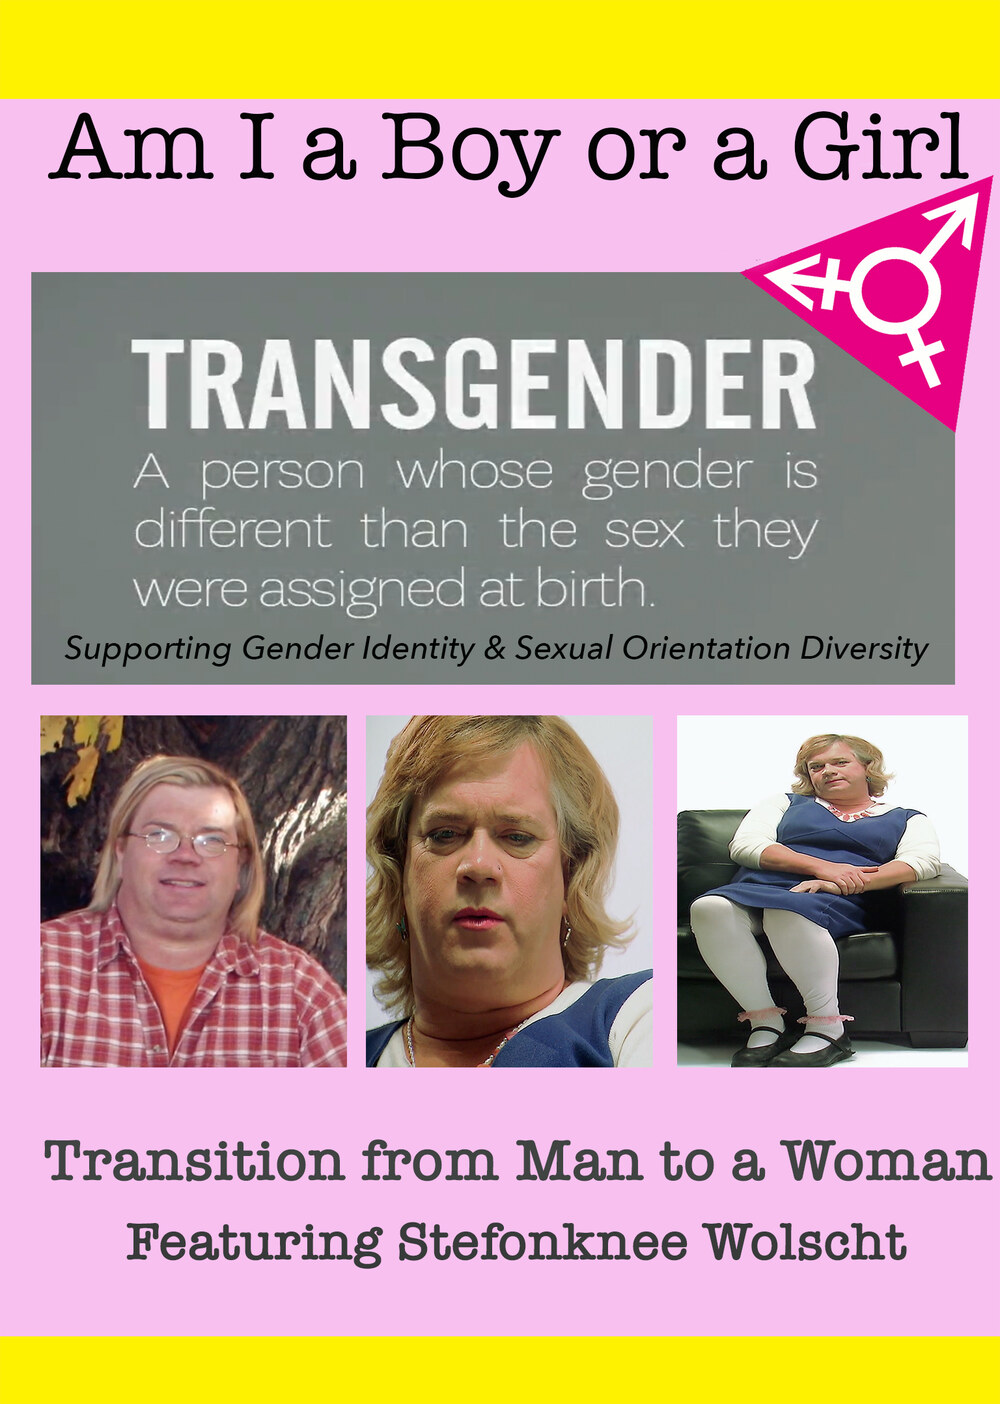 T8996 - Am I A Boy of Girl Featuring Stefonknee Wolscht - Transition from Man to a Woman